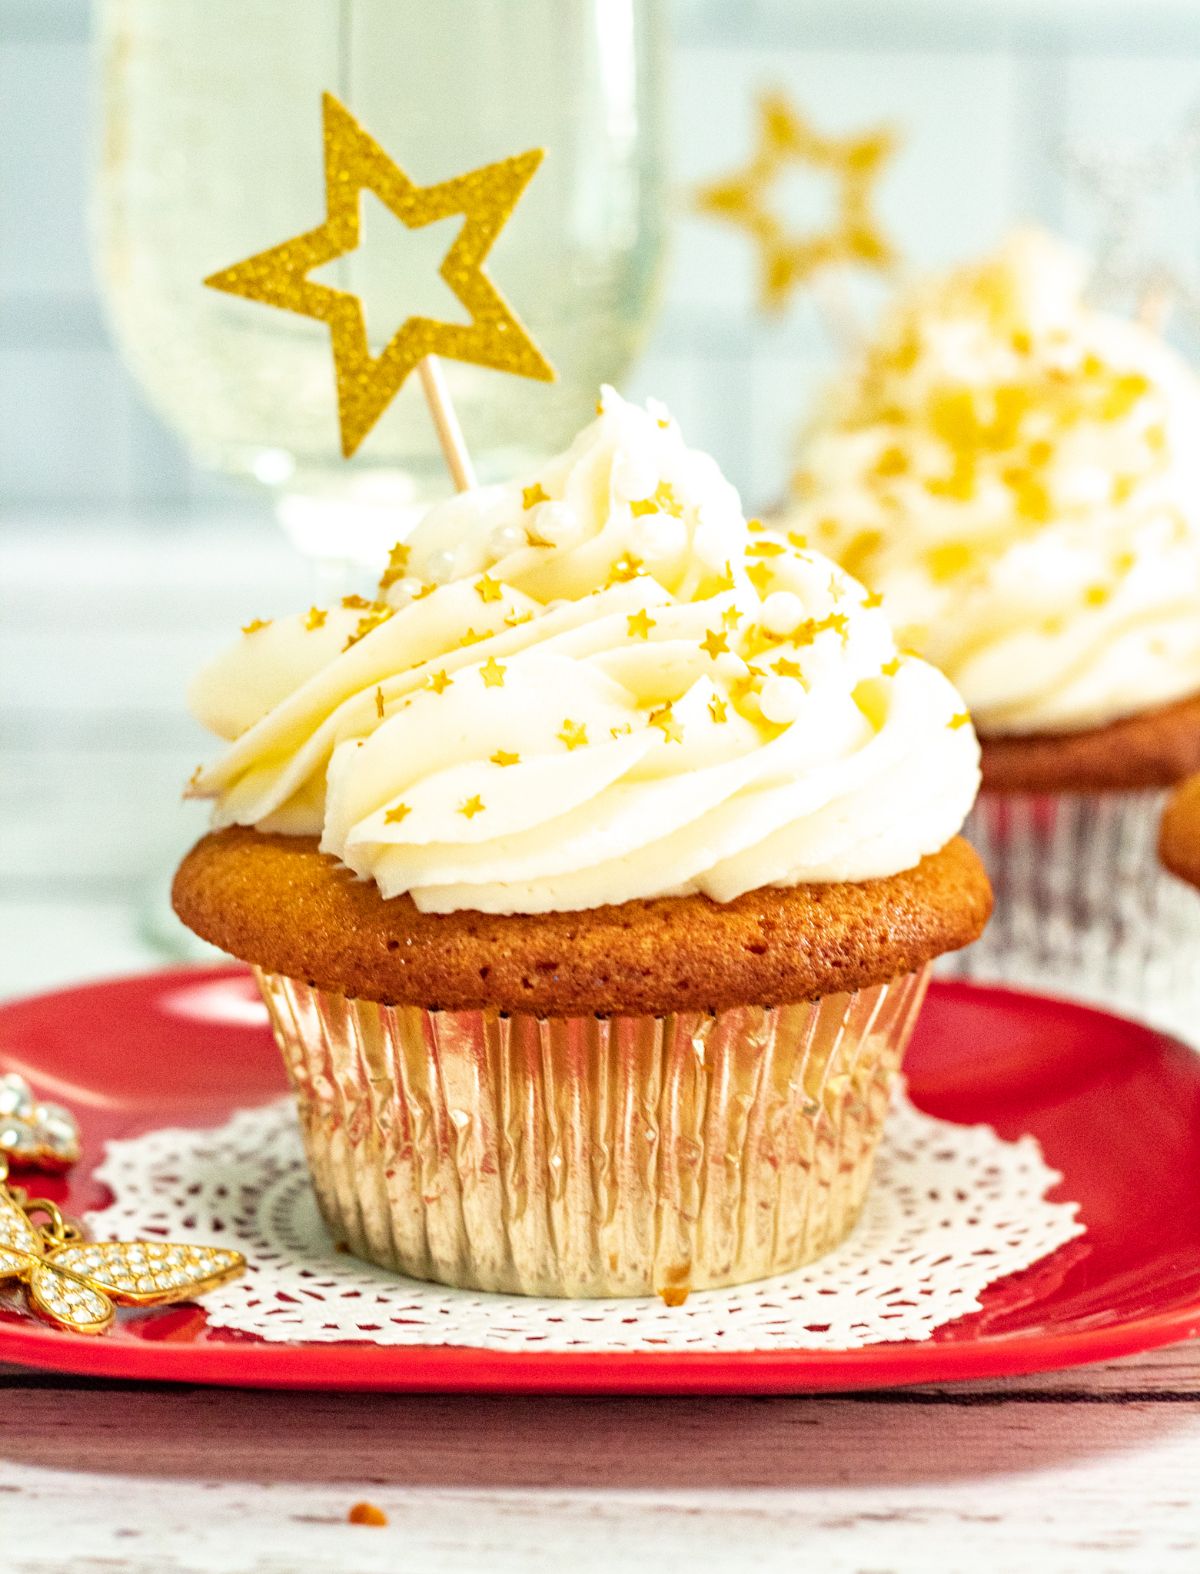 Champagne Cupcakes decorated with gold stars.